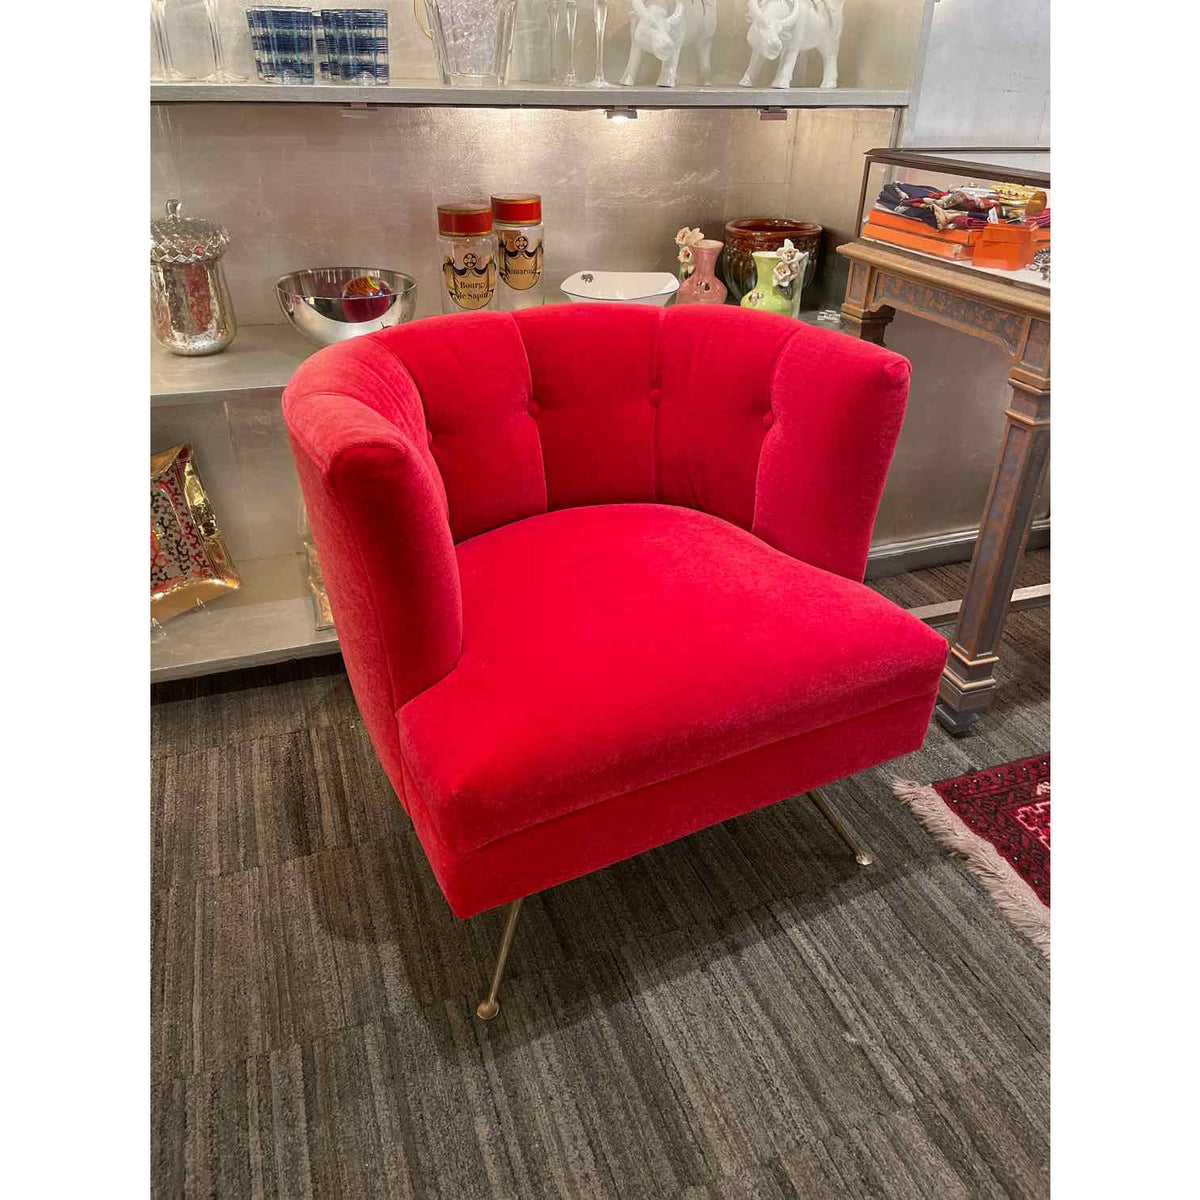 Adesso Red Mohair Itialian side/arm chair - colletteconsignment.com